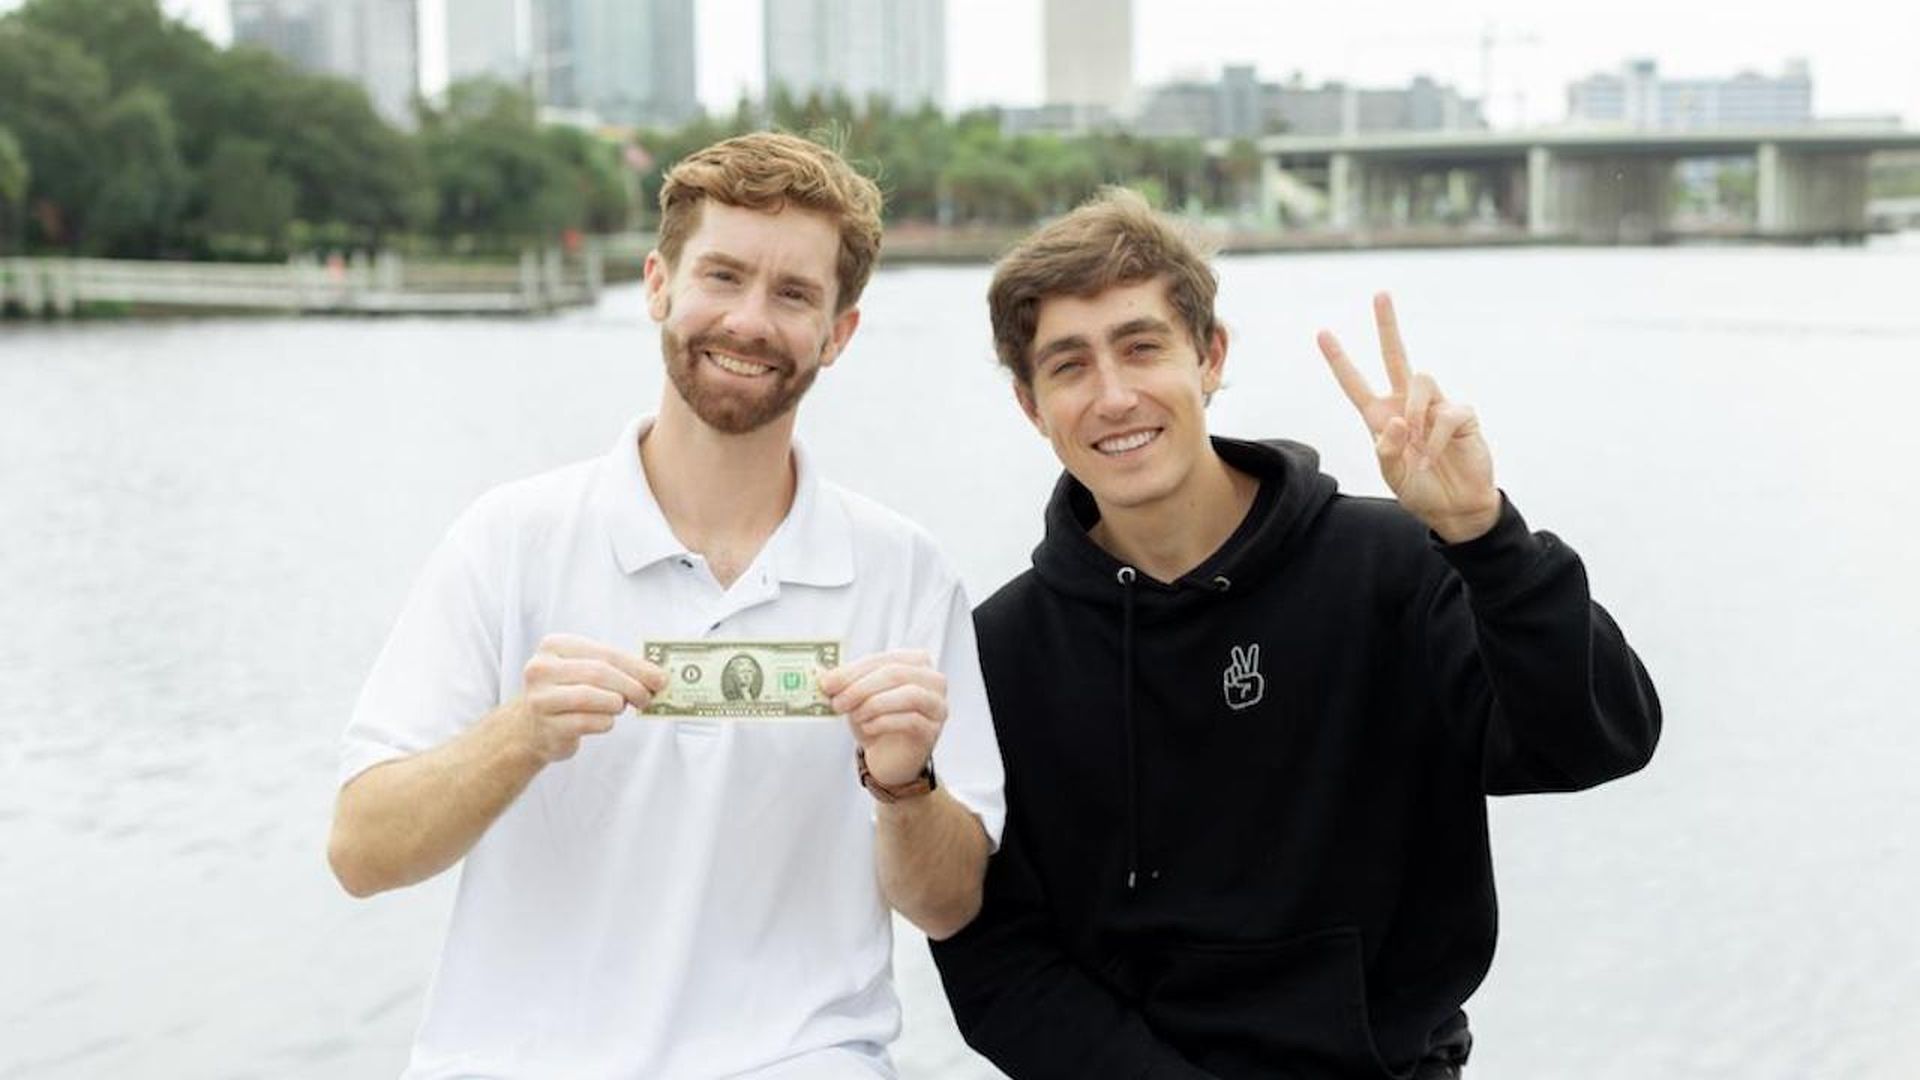 Joe holding a $2 bill and Parker holding up a peace sign in downtown Tampa